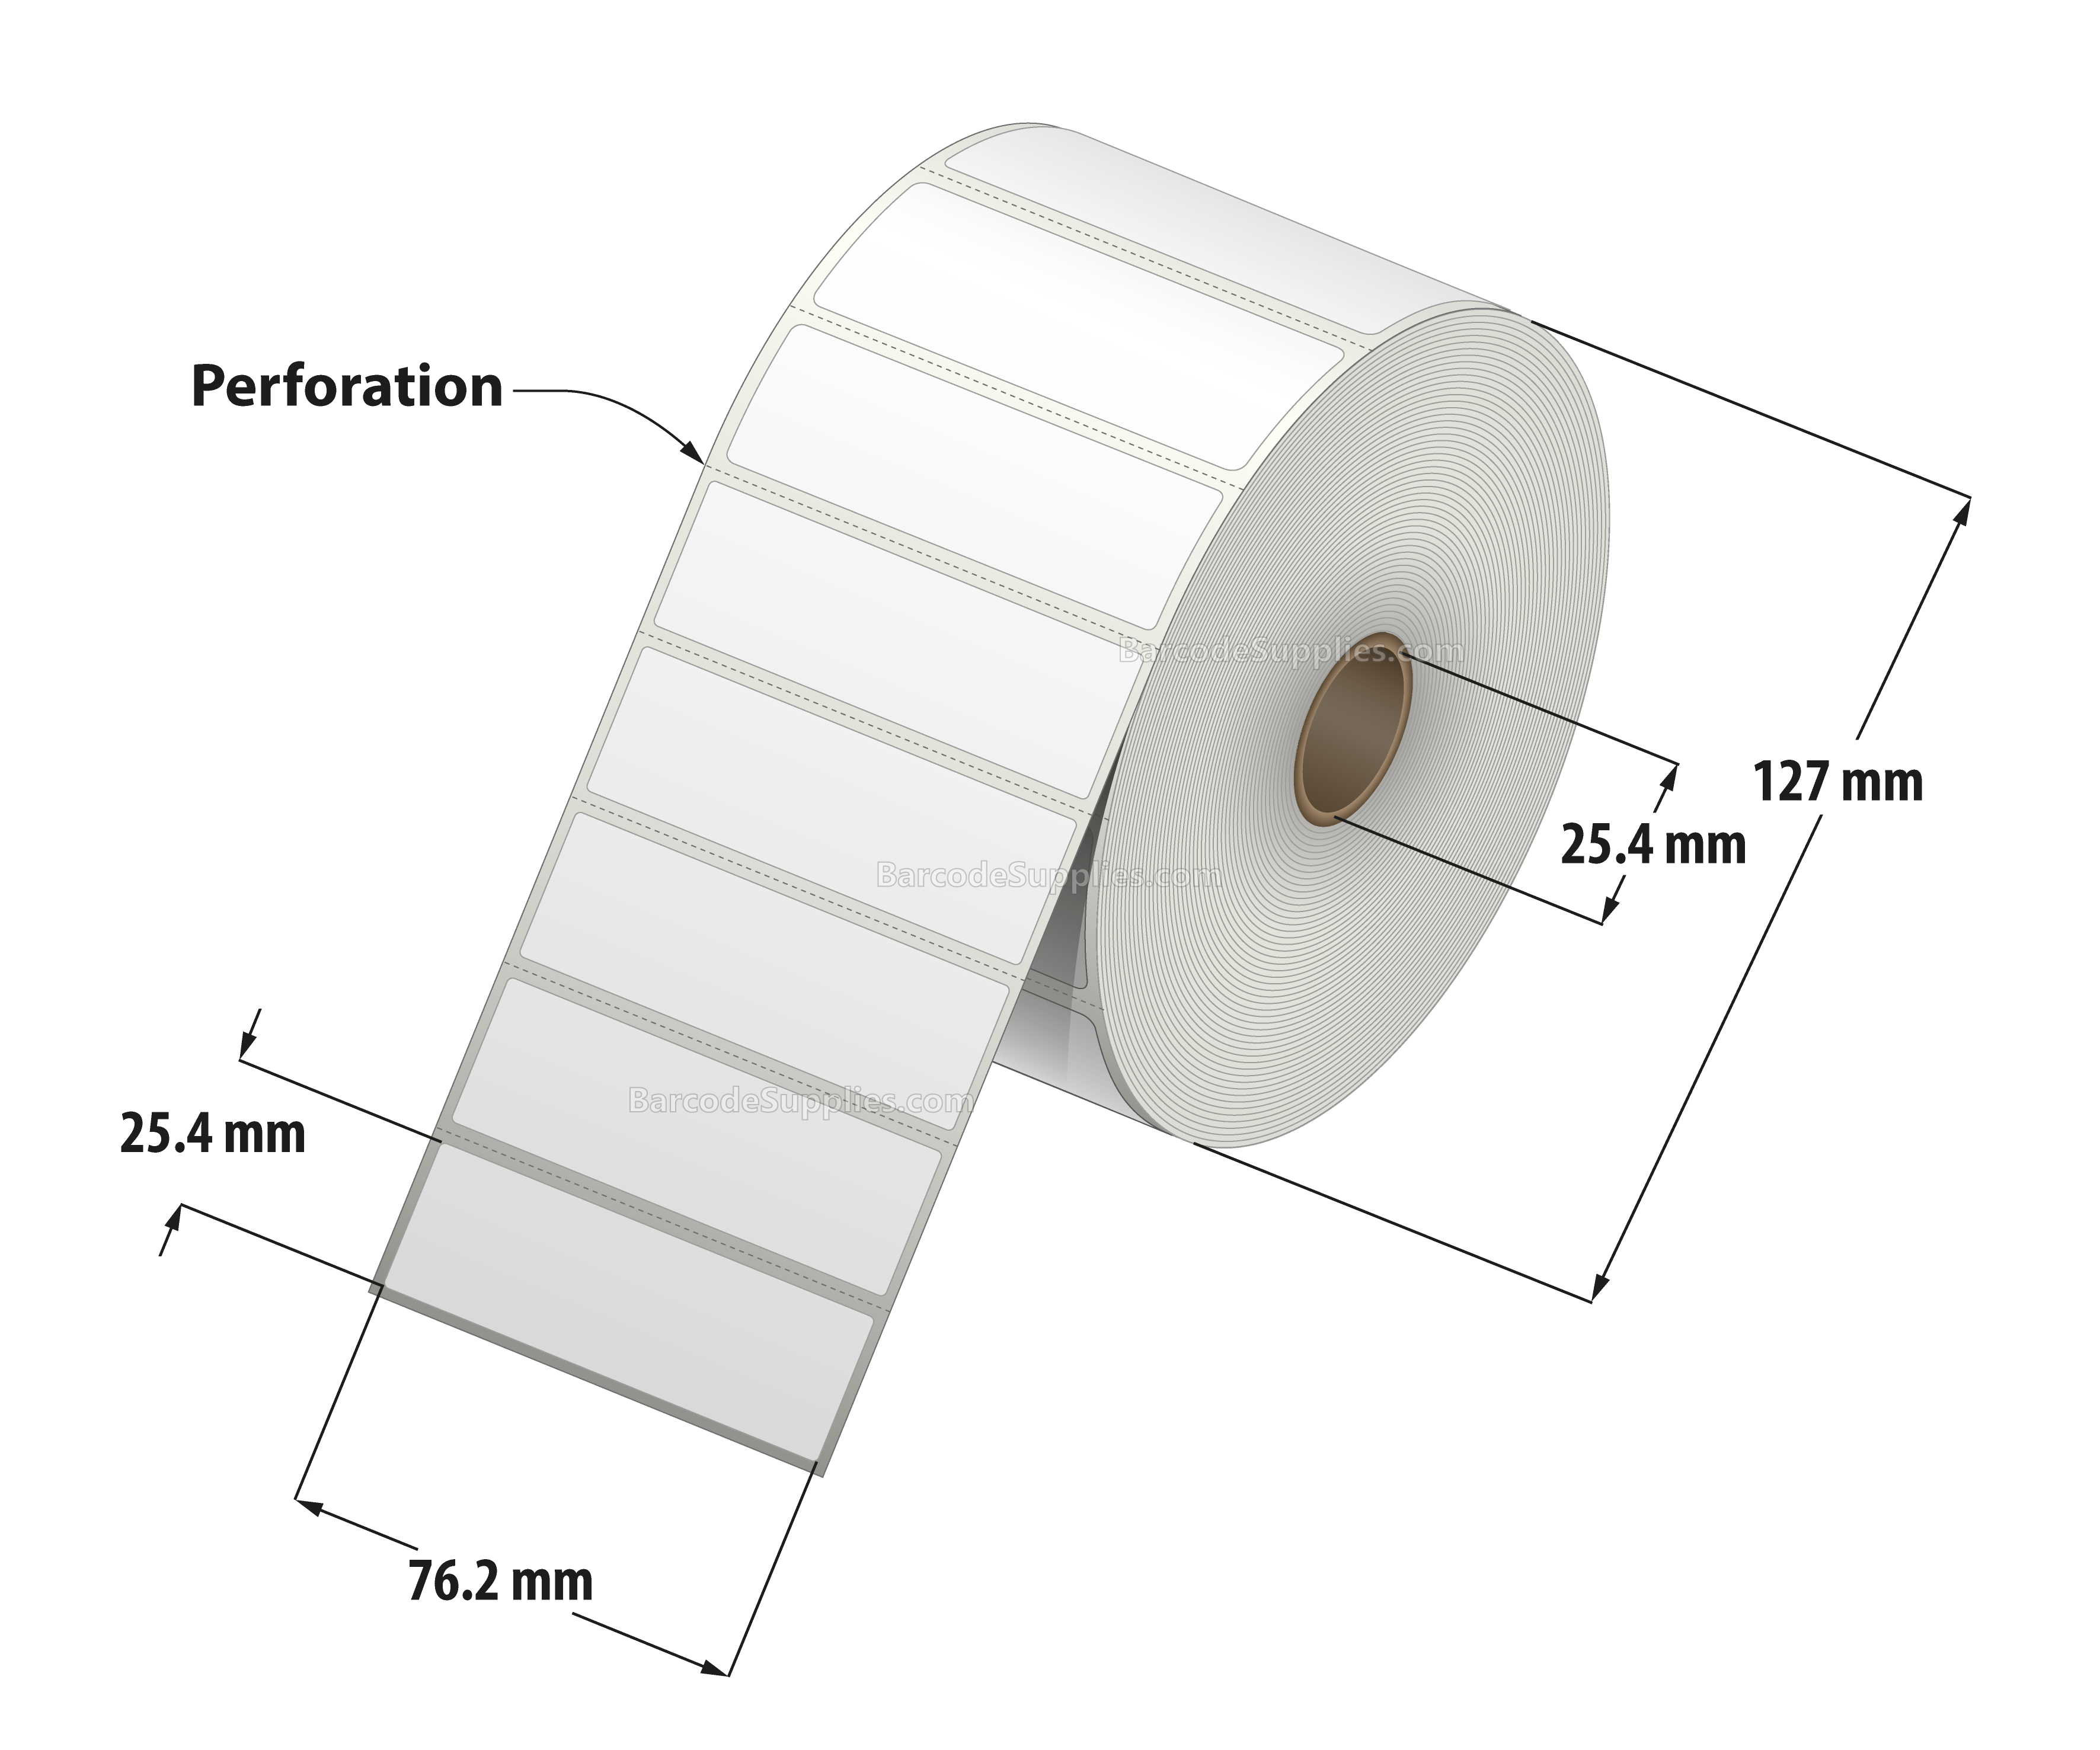 3 x 1 Thermal Transfer White Labels With Permanent Adhesive - Perforated - 2500 Labels Per Roll - Carton Of 12 Rolls - 30000 Labels Total - MPN: RT-3-1-2500-1 - BarcodeSource, Inc.